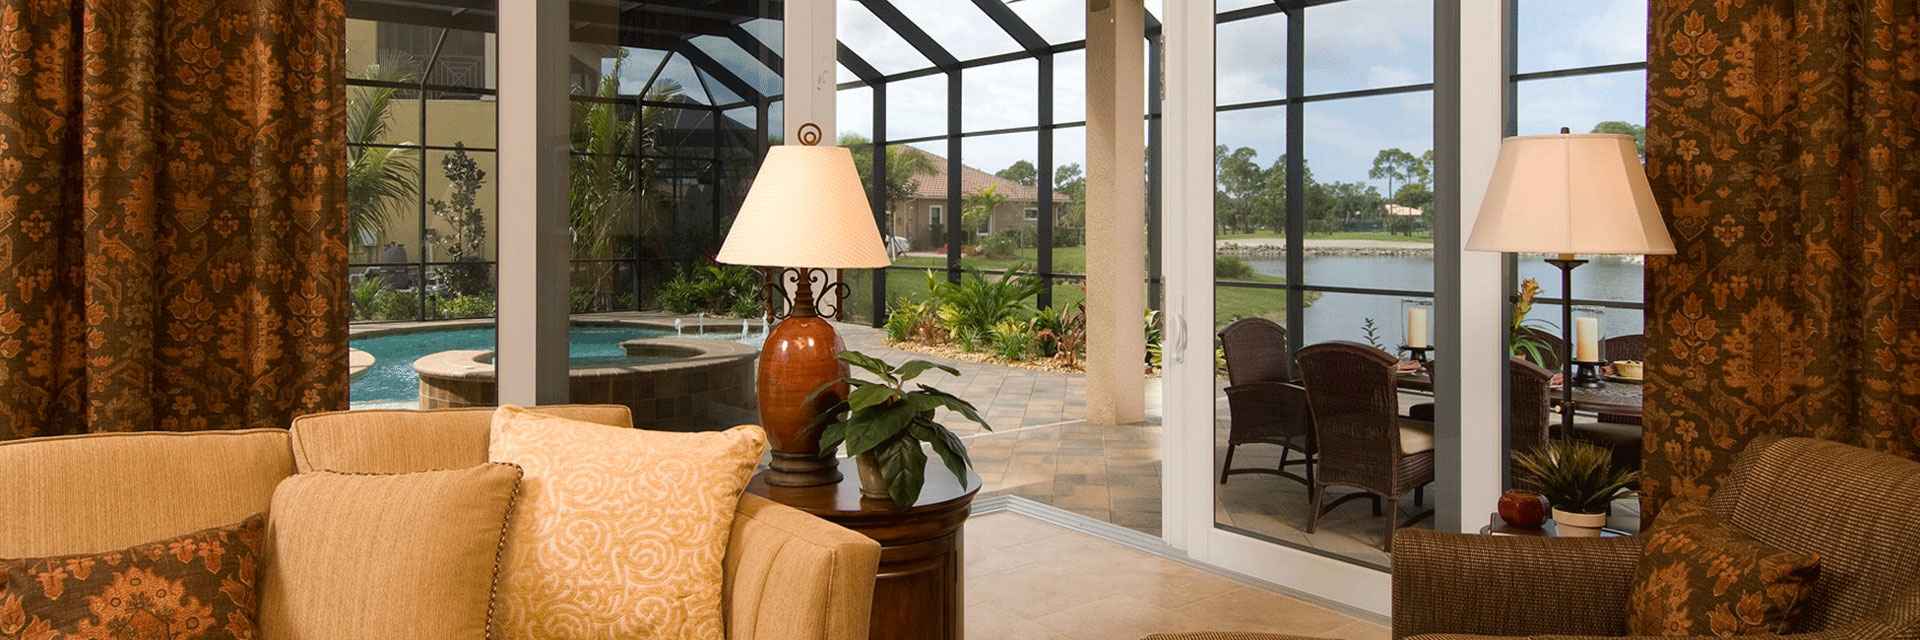 Outdoor Living Trends With Hurricane Windows